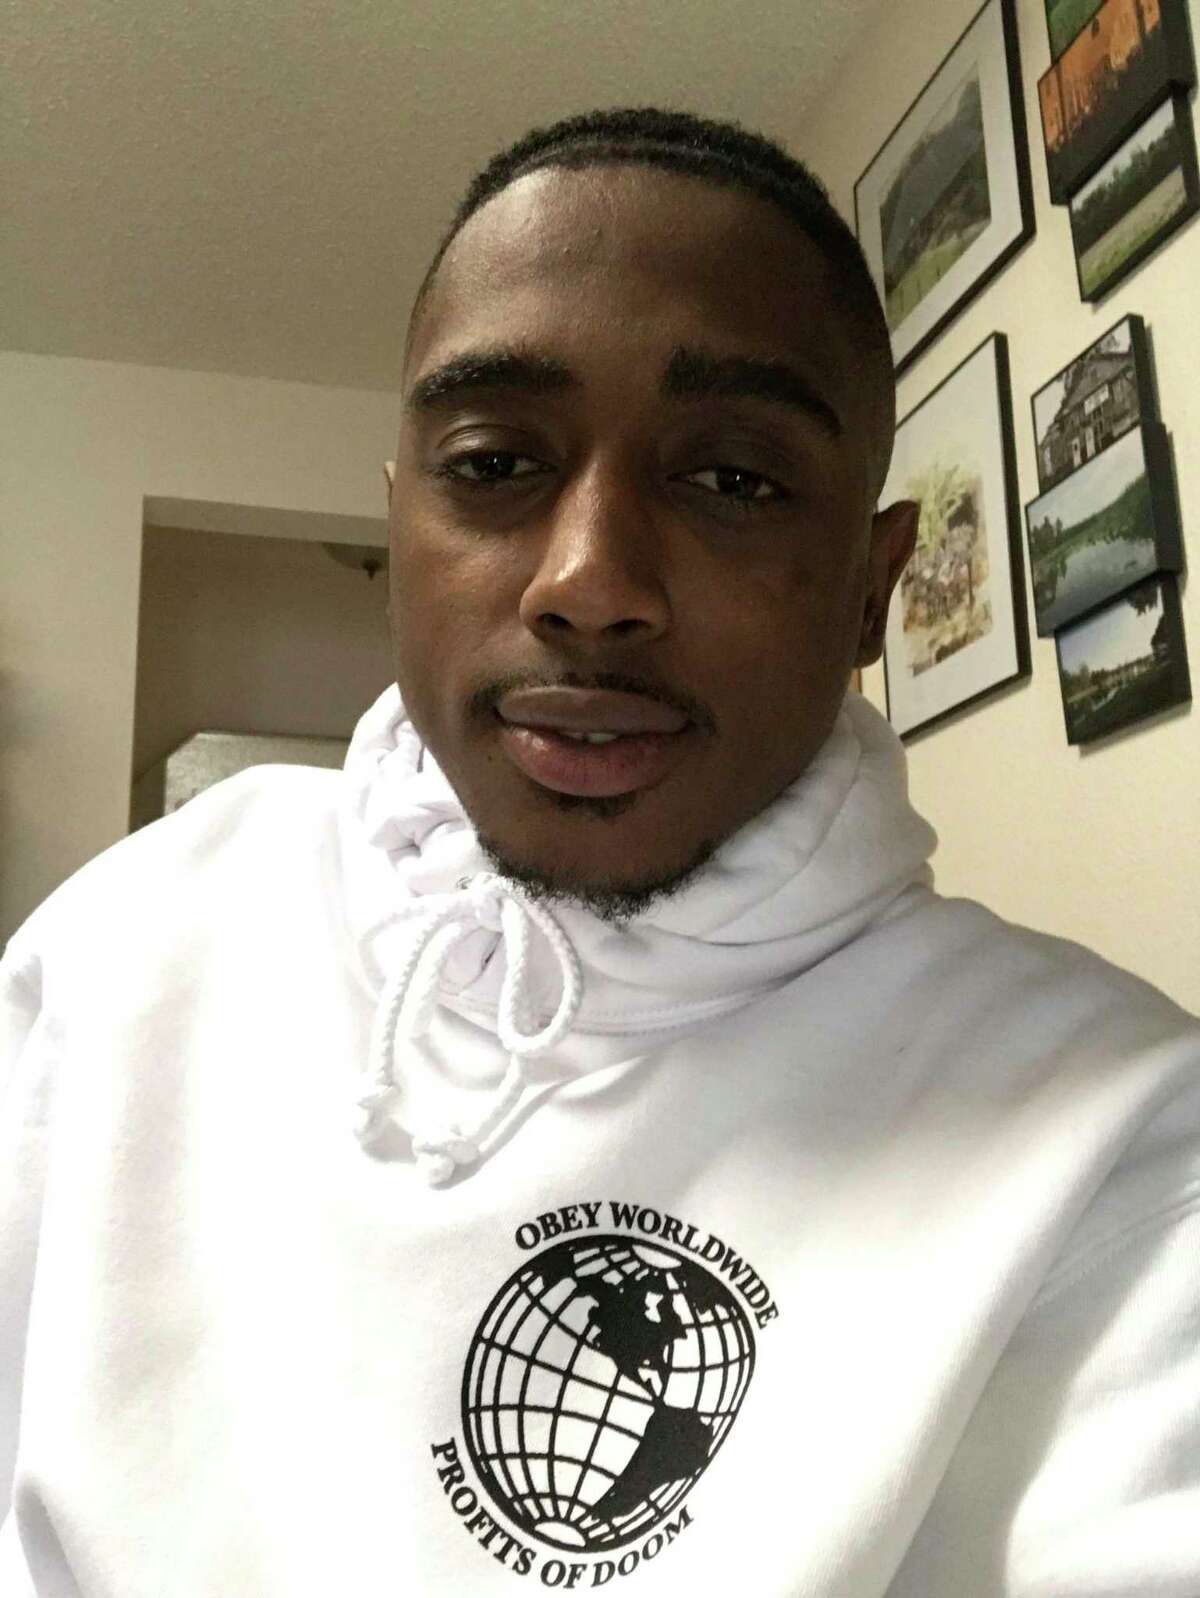 Tarik Ross is seen in an undated courtesy photo provided by his family. Ross was killed March 2, 2018. Joseph Alvarado is currently on trial for Ross's death, accused by prosecutors of killing Ross in a robbery that went wrong.